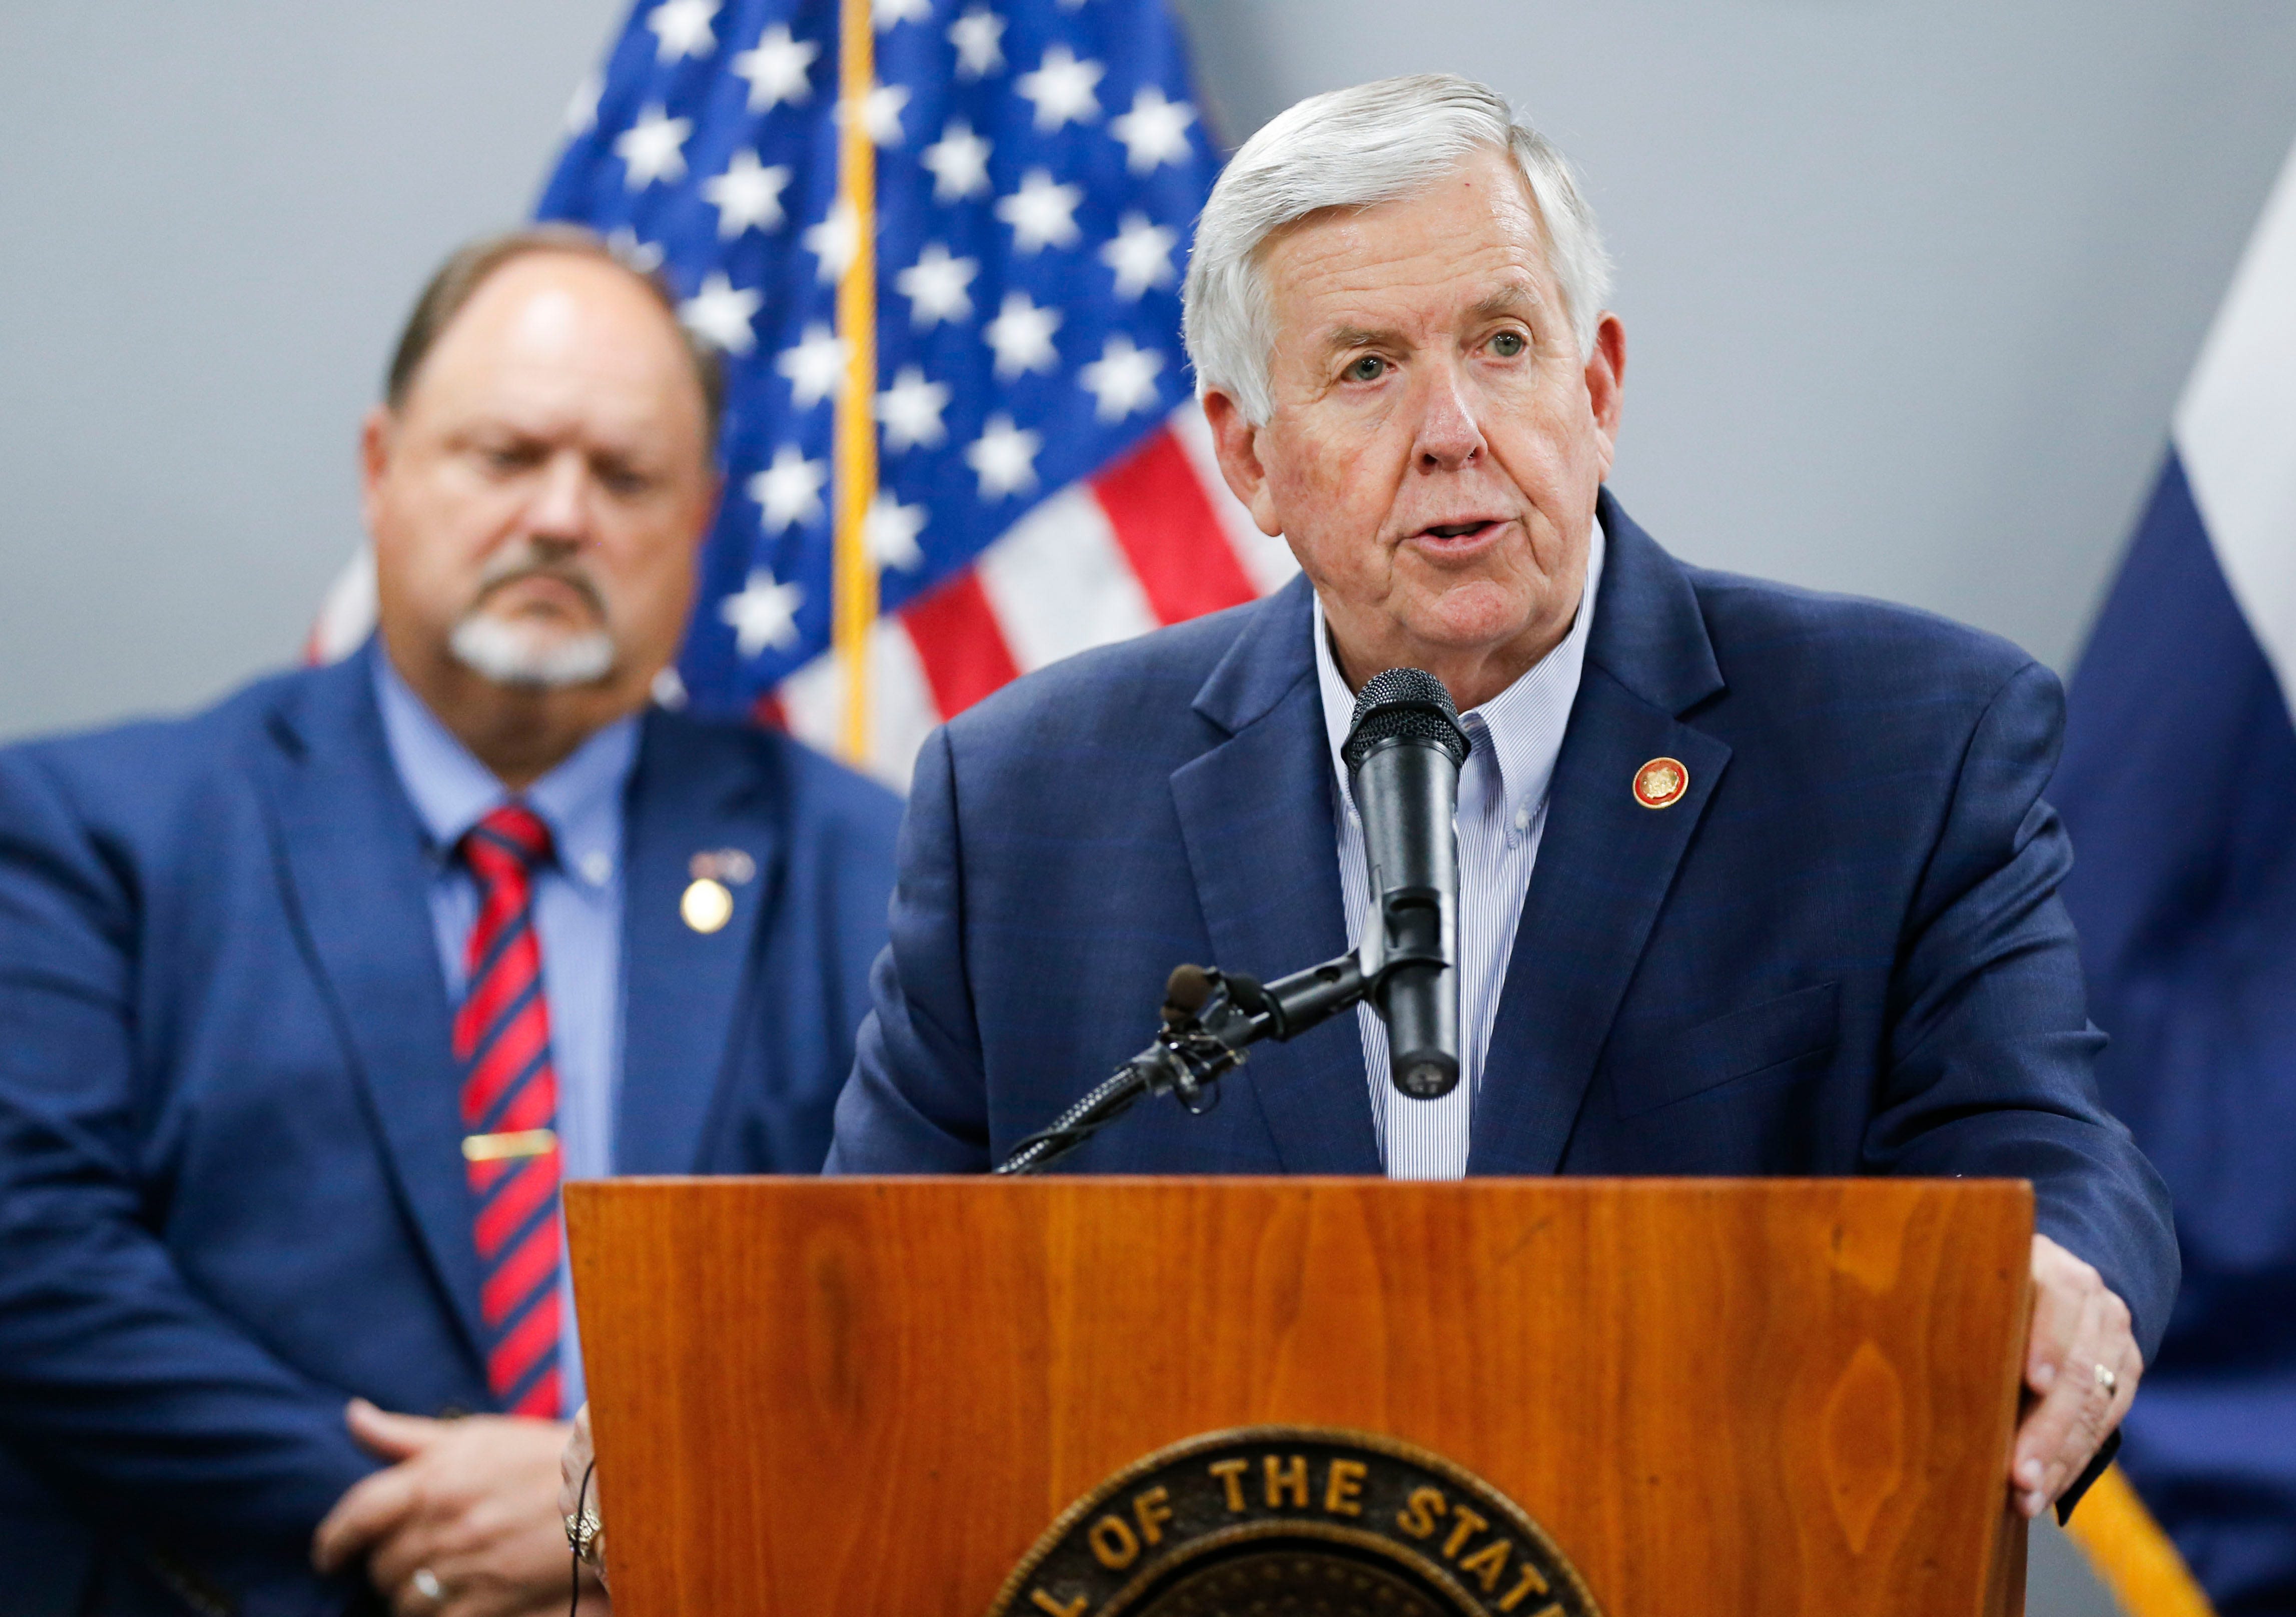 Gov. Parson travels to Texas to sign funding bill for MO troops providing border security